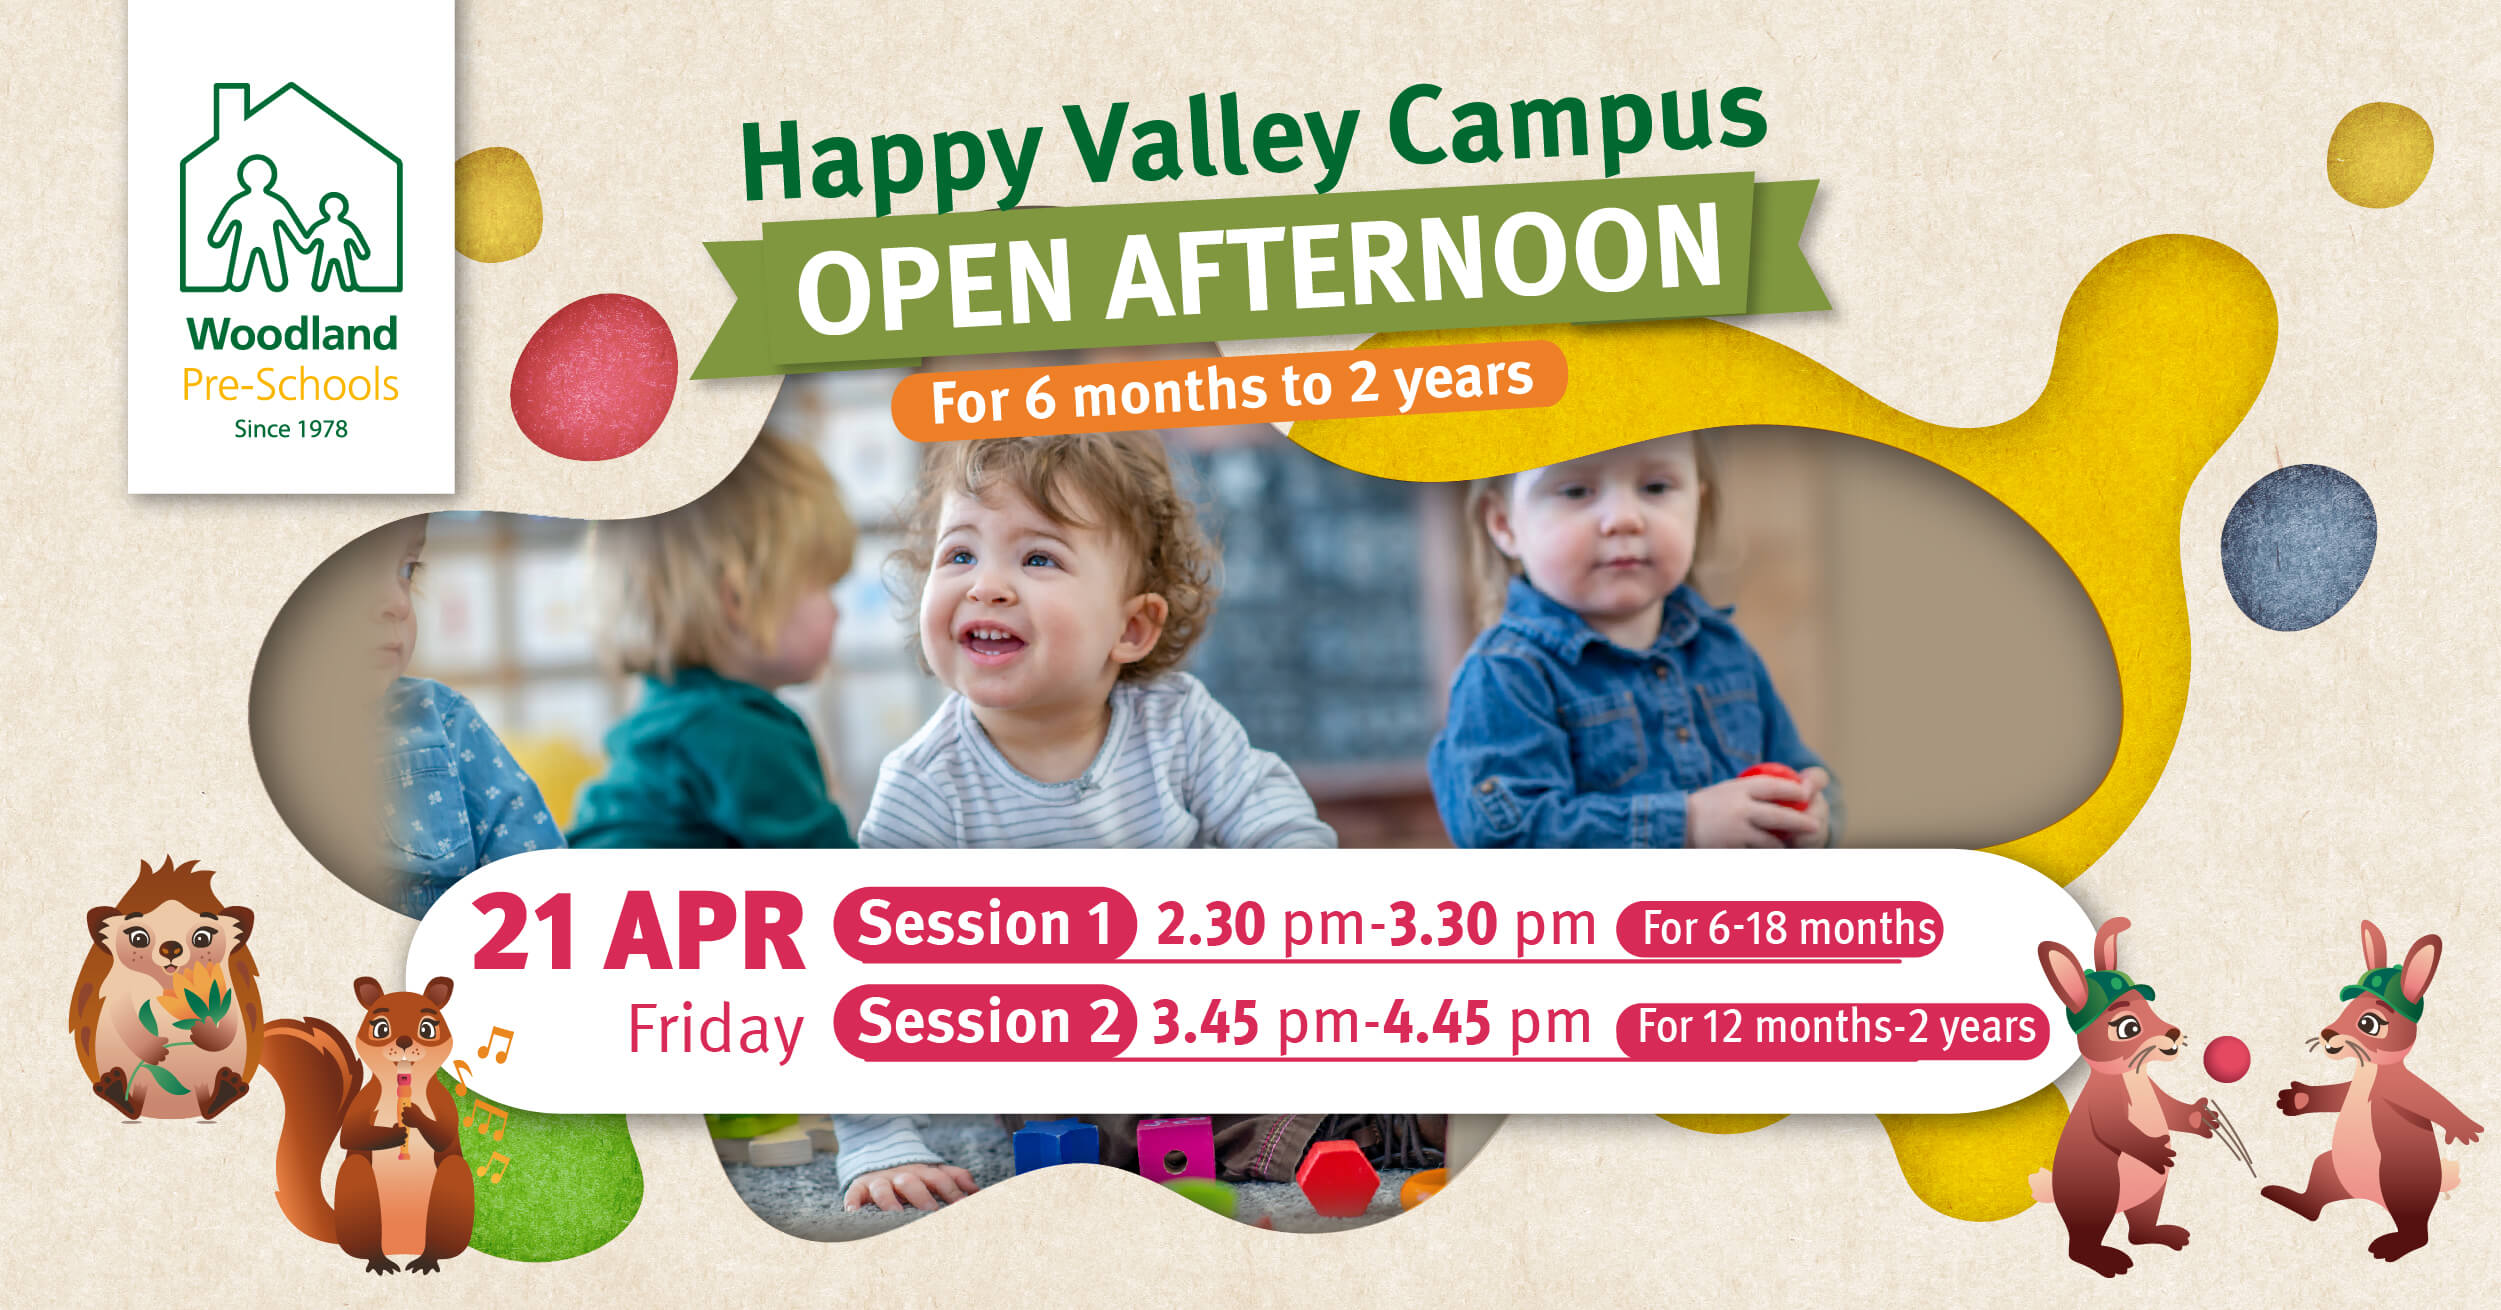 Happy Valley campus hosting a fun open afternoon for children 6 months to 2 years